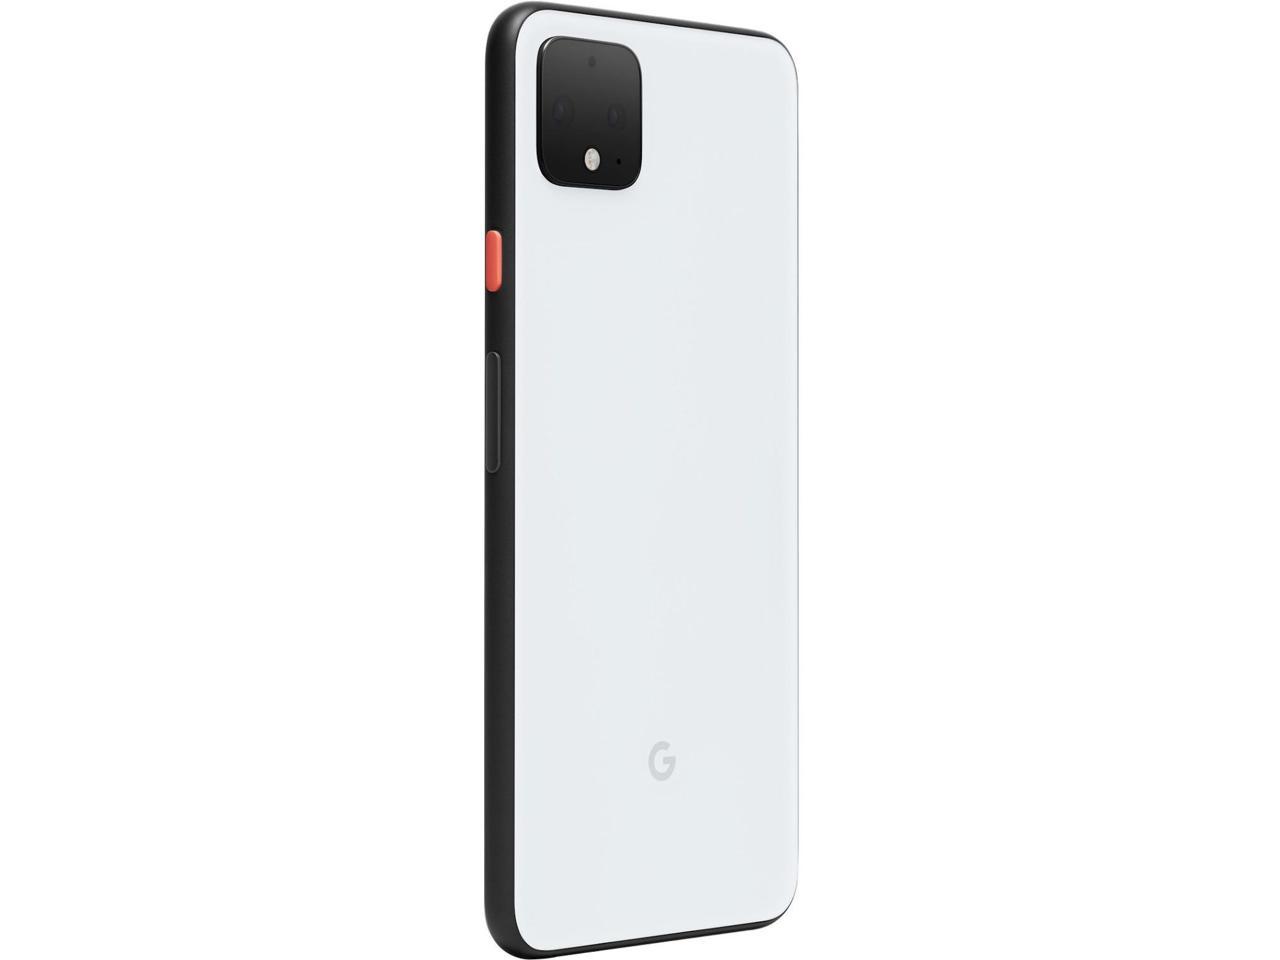 Google Pixel 4 - Clearly White - 64GB - Unlocked, Smart Phone